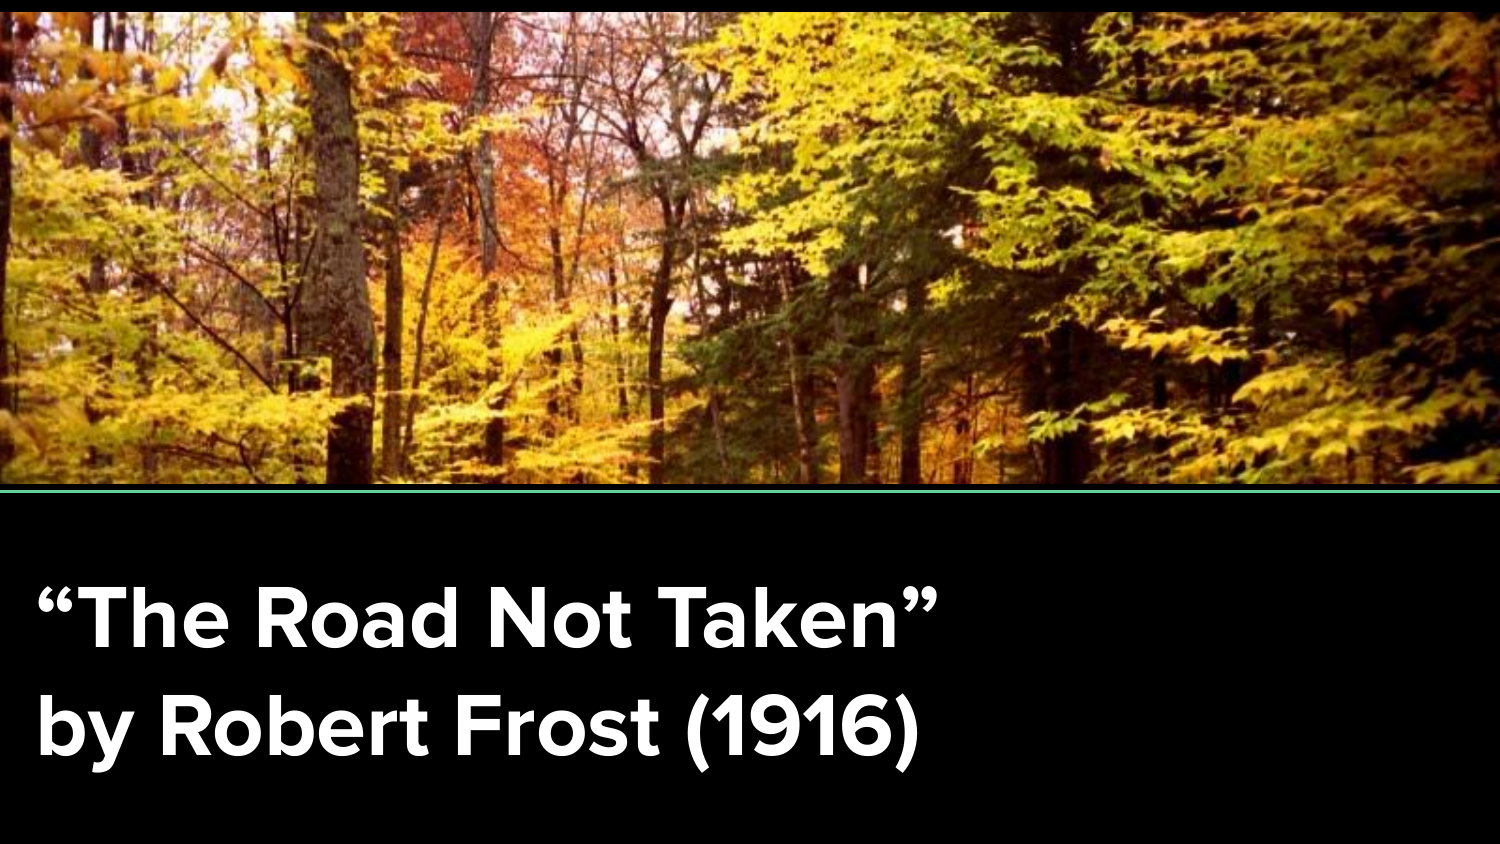 rober frost the road not taken analysis